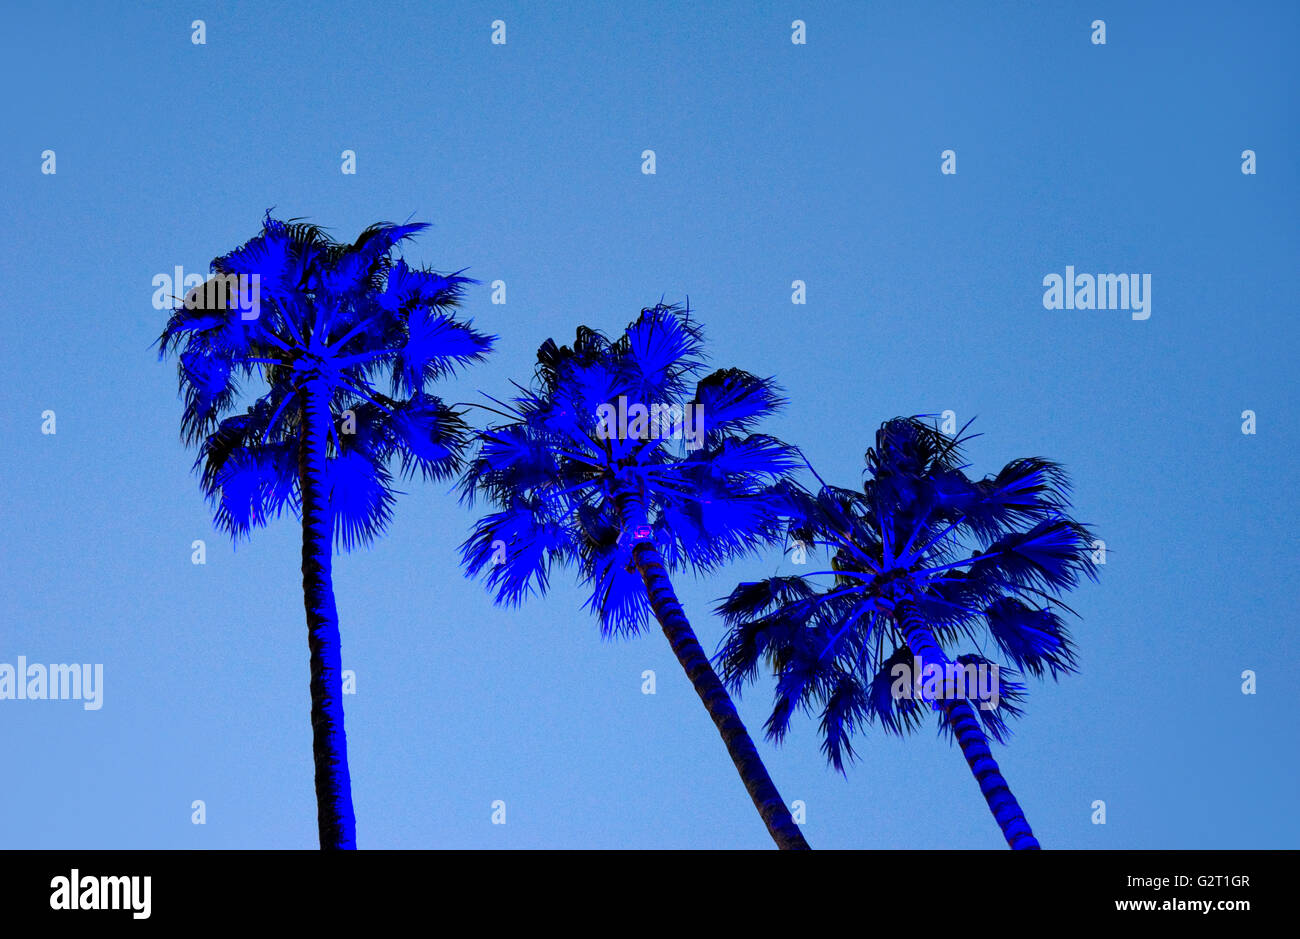 Lit palm trees at dusk in Los Angeles Stock Photo